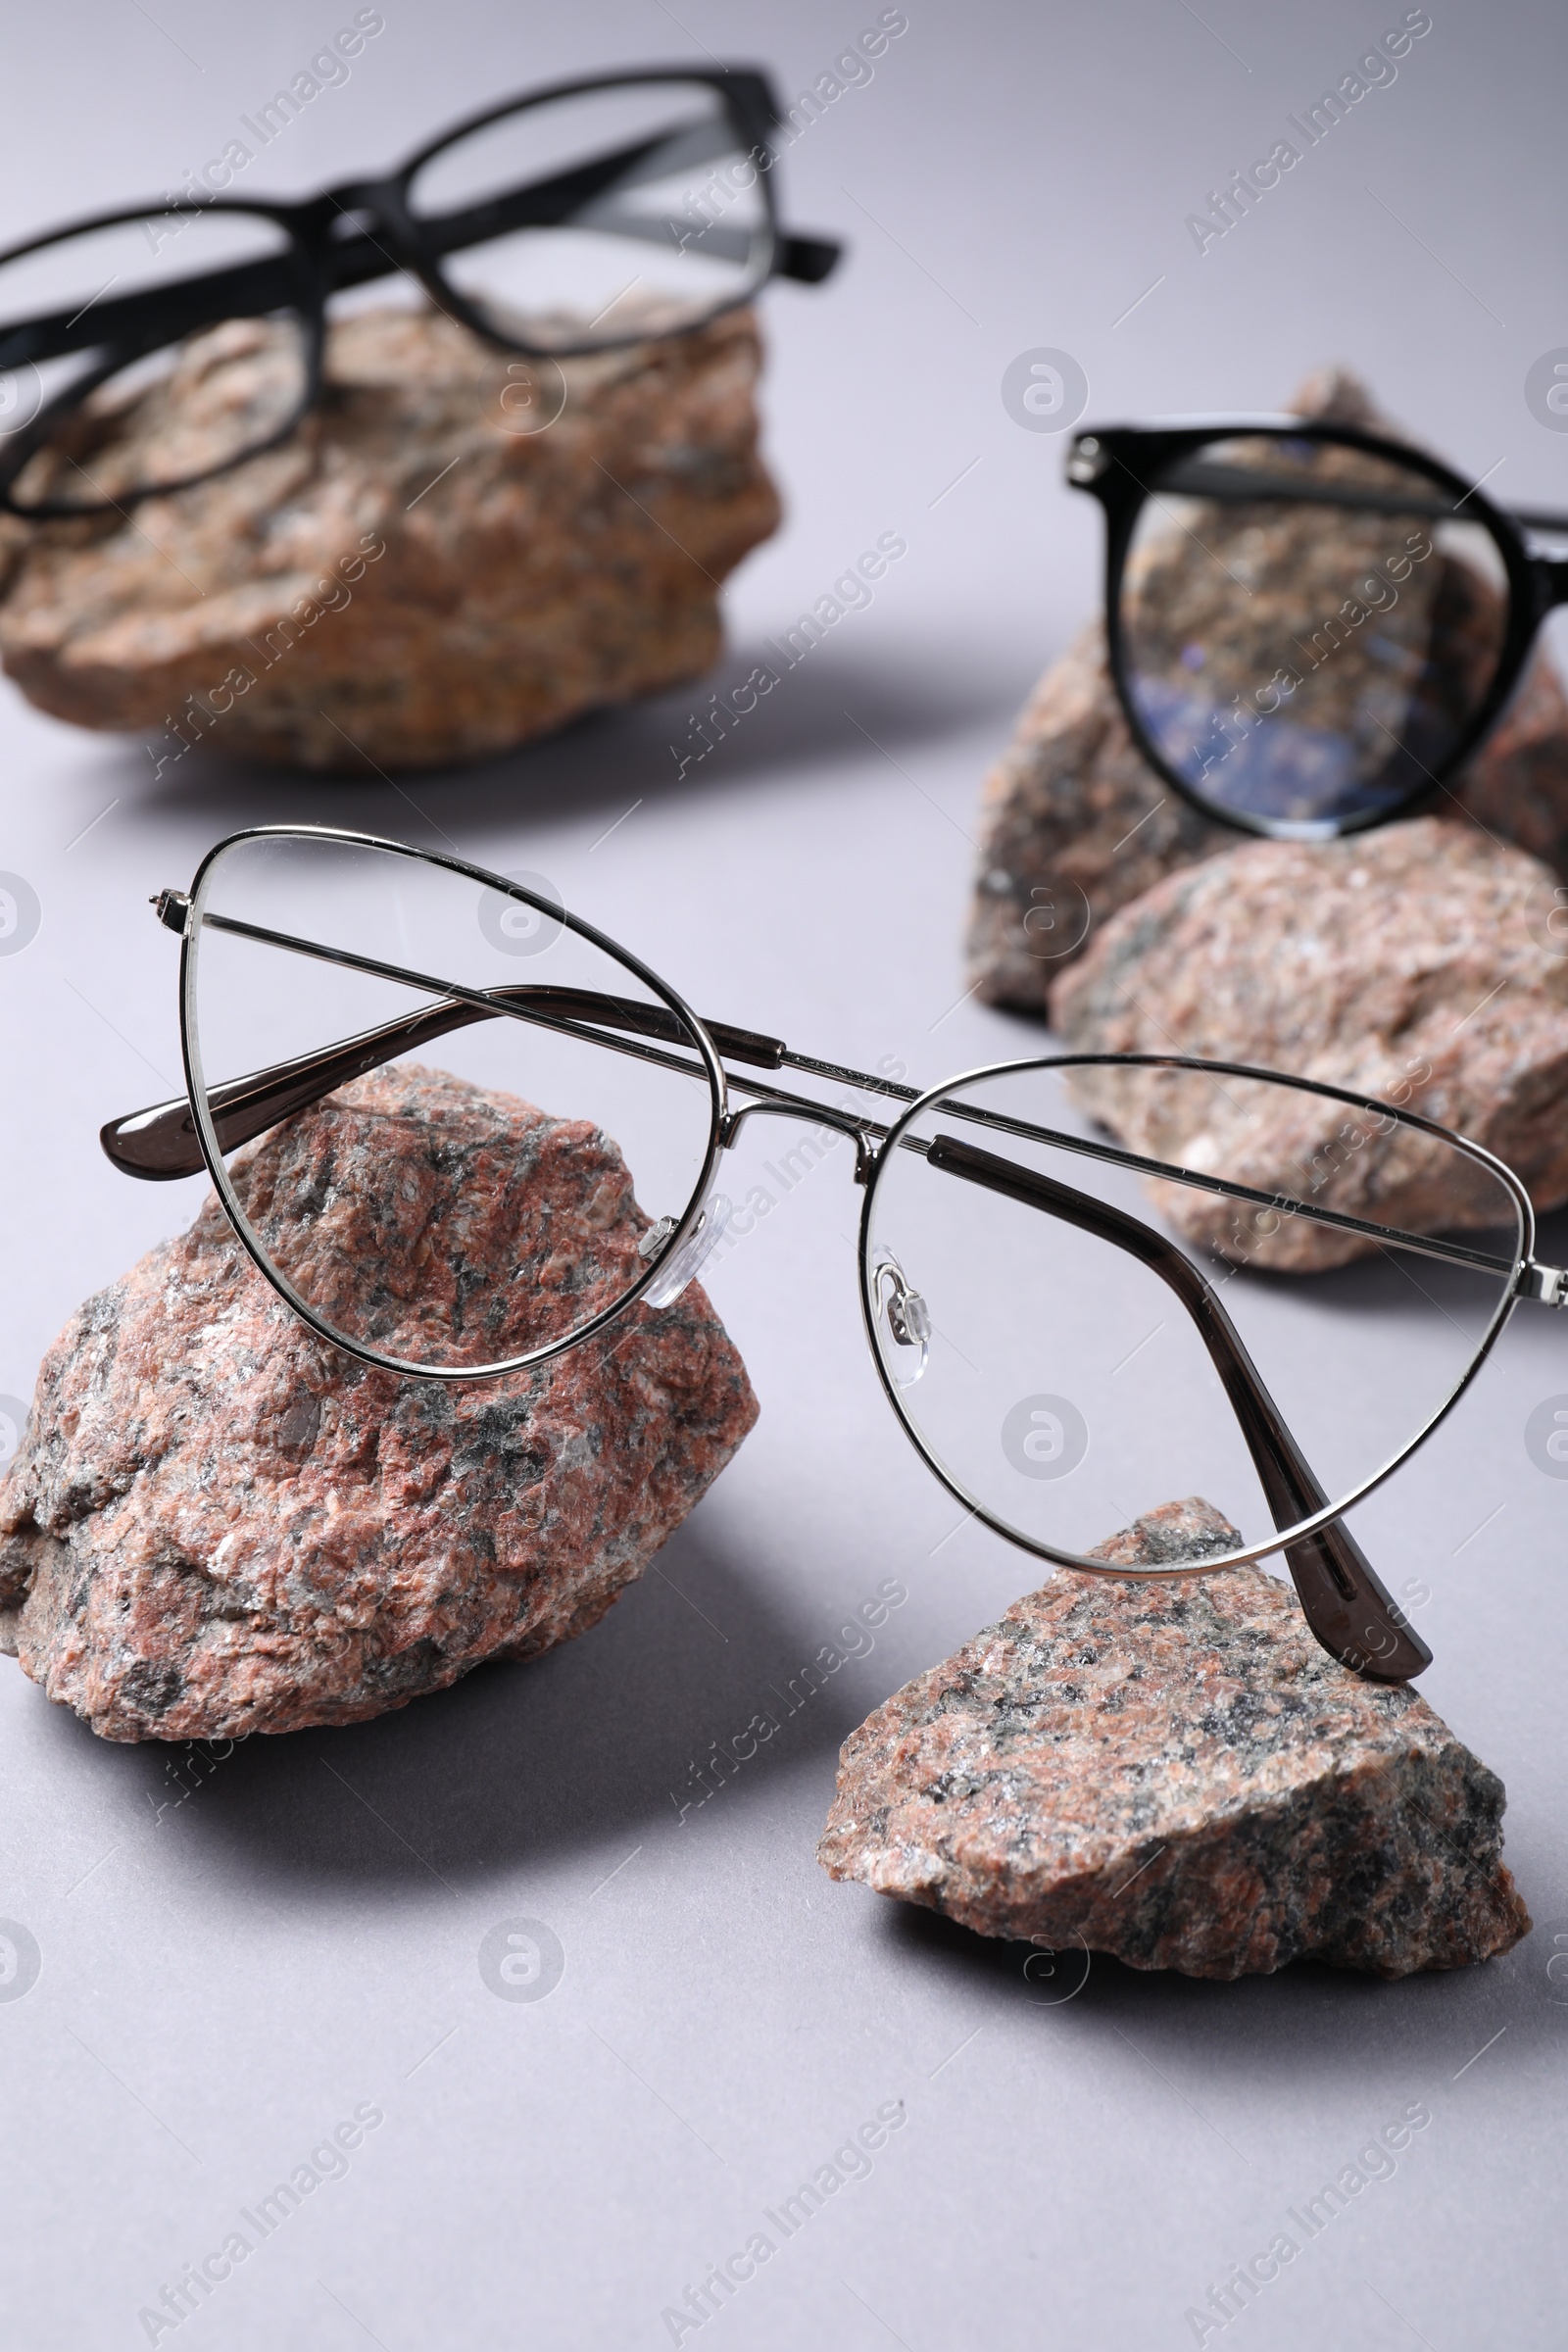 Photo of Different stylish glasses on stones against white background, closeup